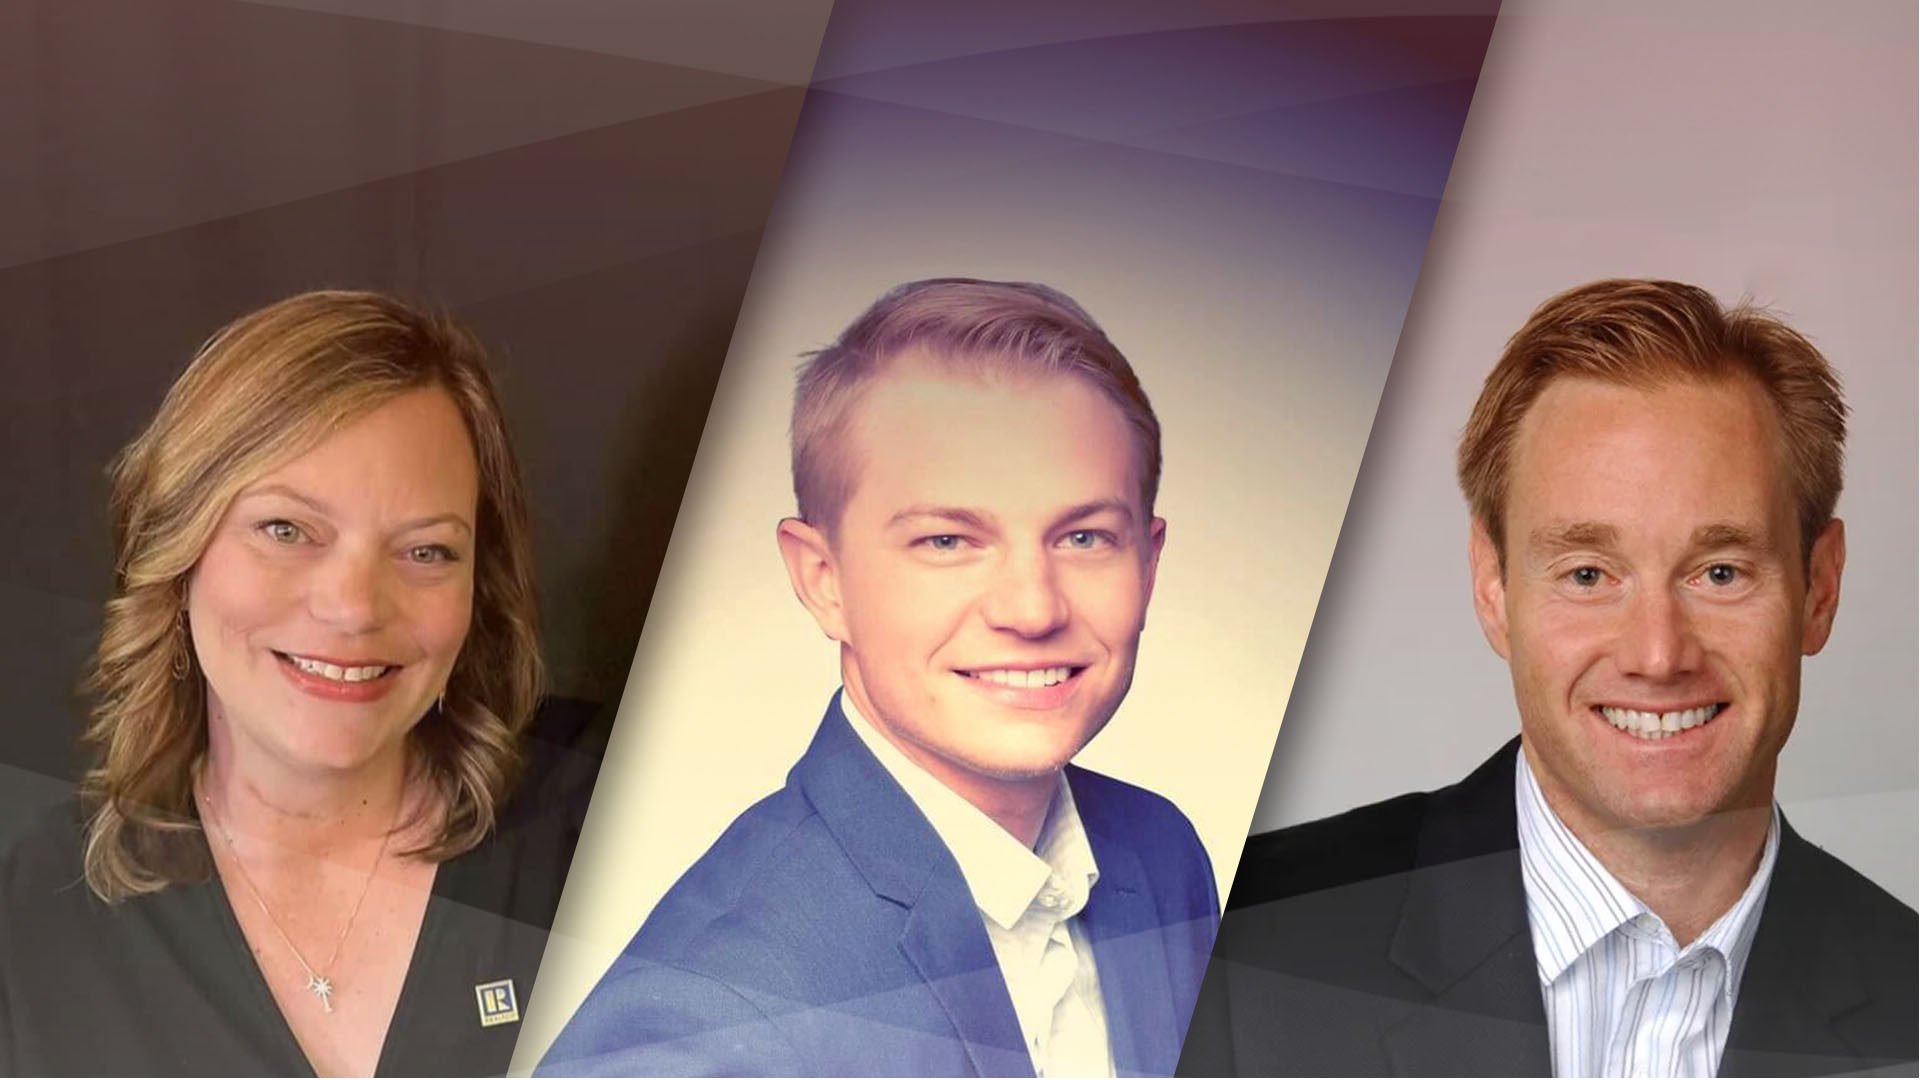 Featured image for “Meet the Newest District Directors at Fathom Realty!”